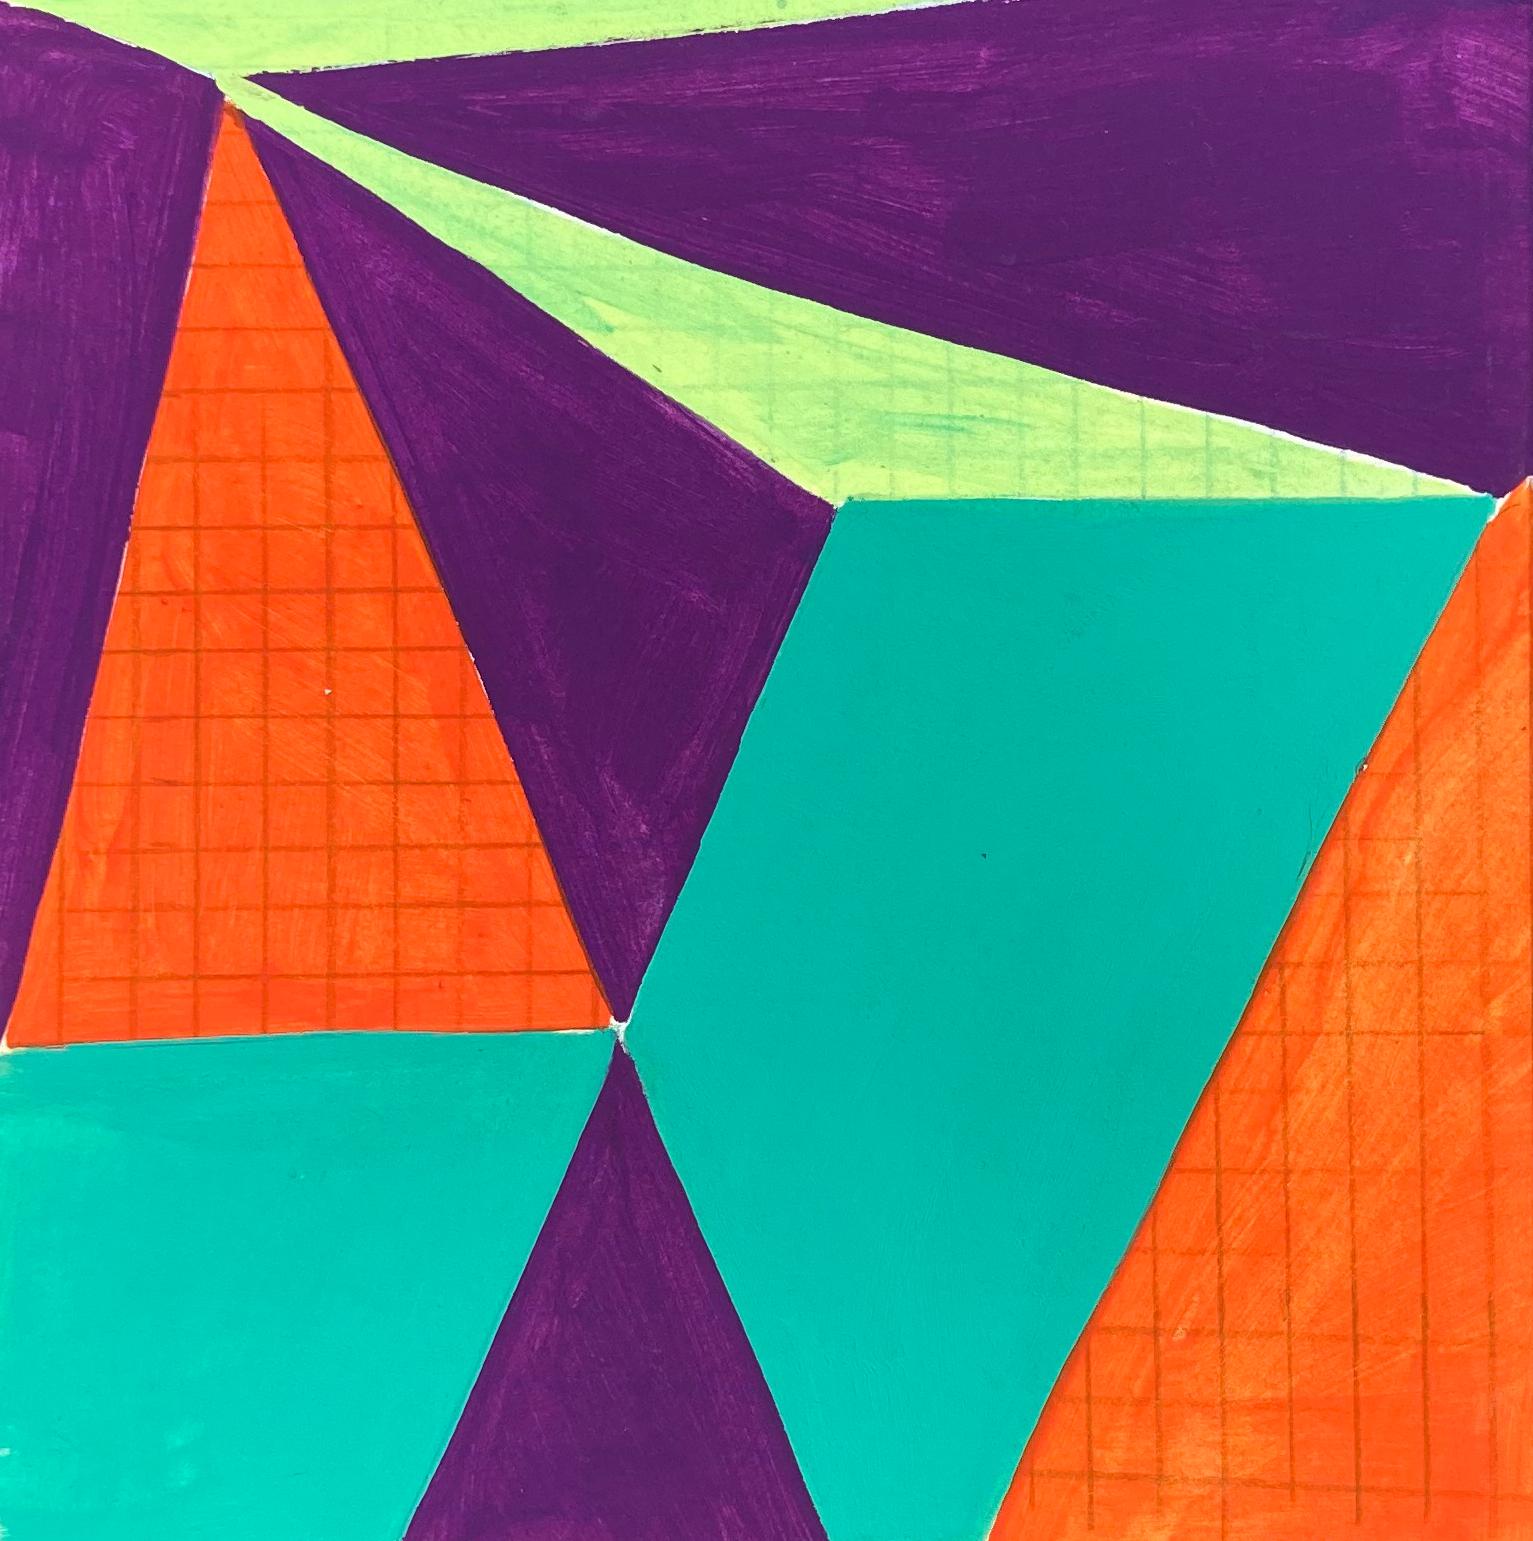 Untitled 1, abstract geometric pattern on paper, green, orange and purple